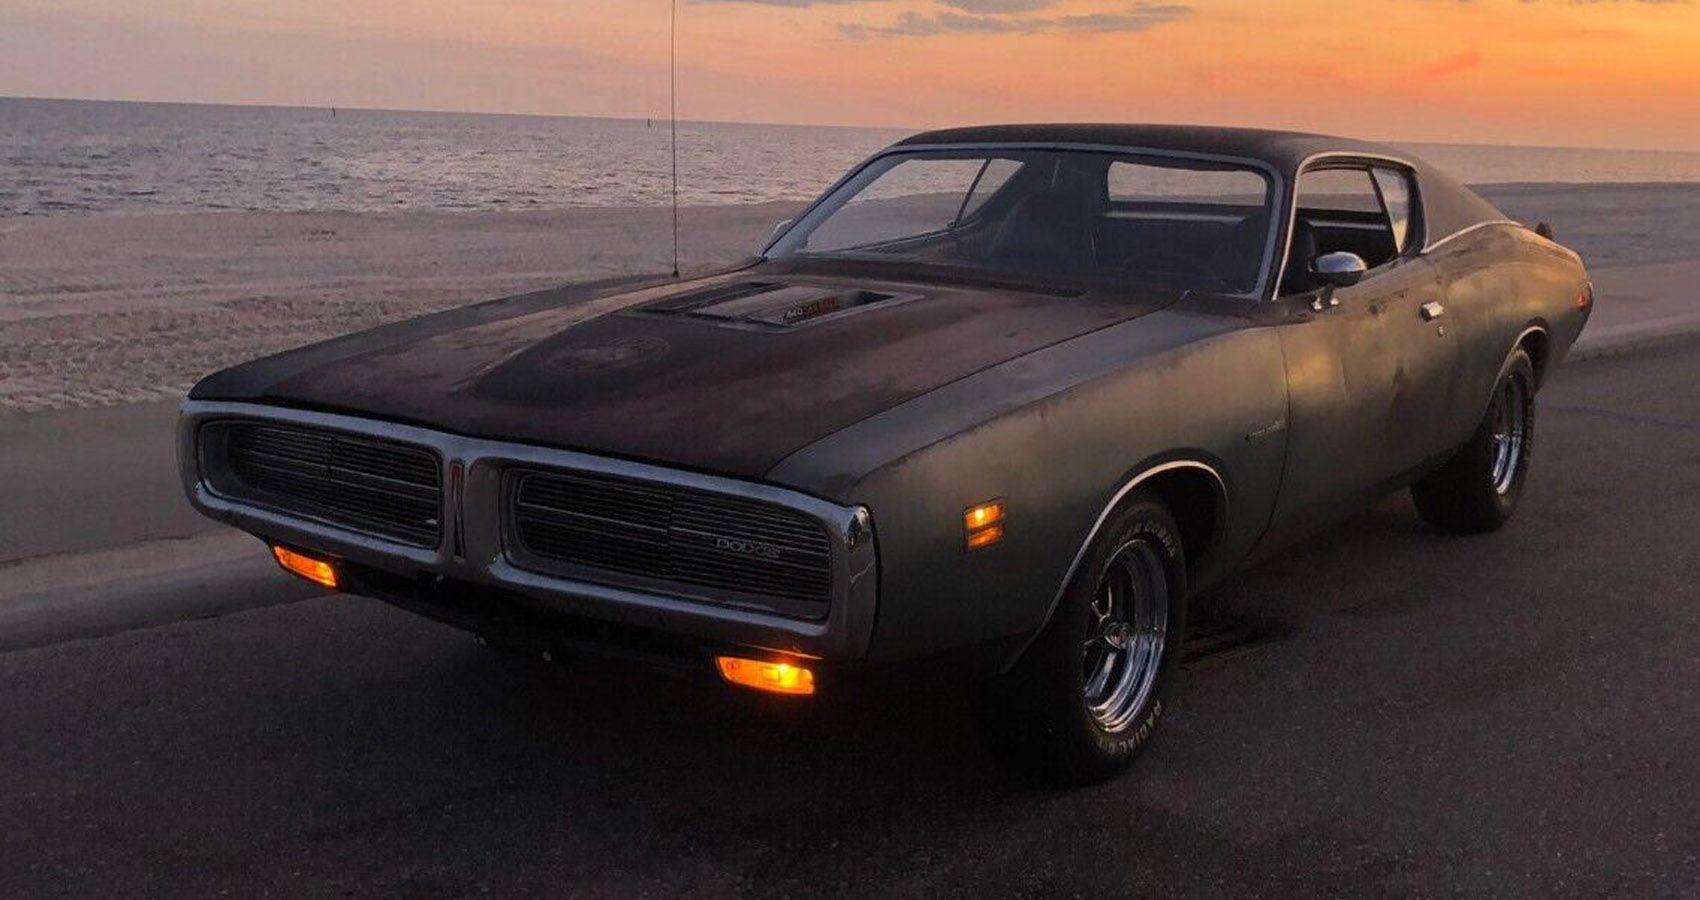 This Rare 1 Of 1 1971 Dodge Charger Super Bee 440 Six Pack Is A Great Restoration Project